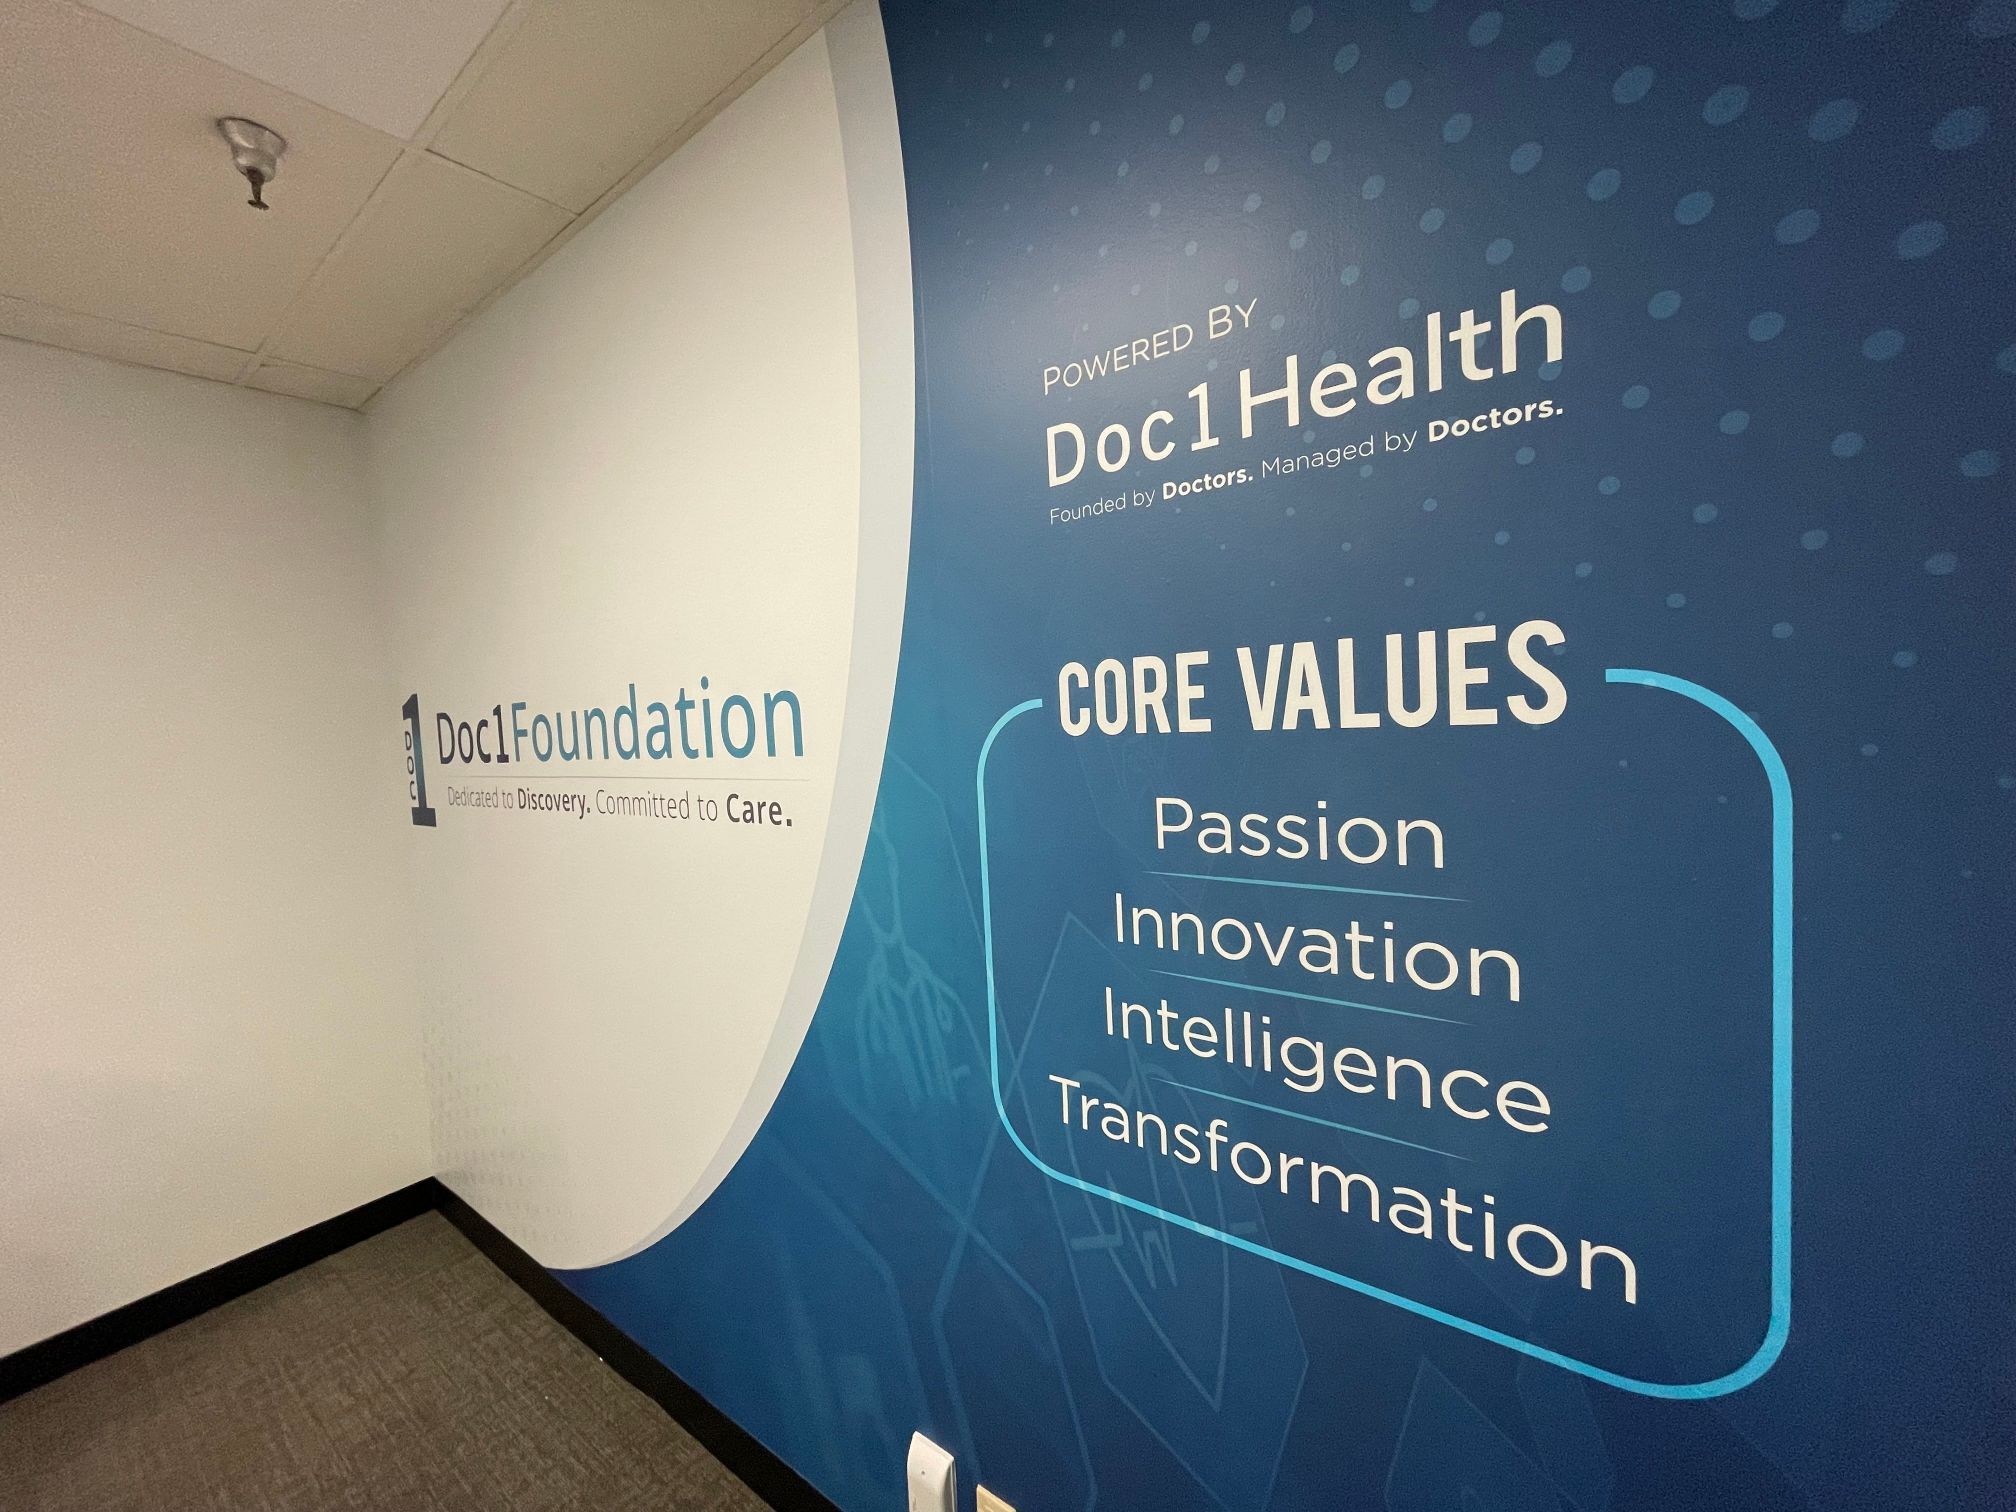 Wall Graphics Window Decals an Acrylic Directory Sign, and a Lobby Logo Brand Doc 1 Health Offices in Newport Beach CA